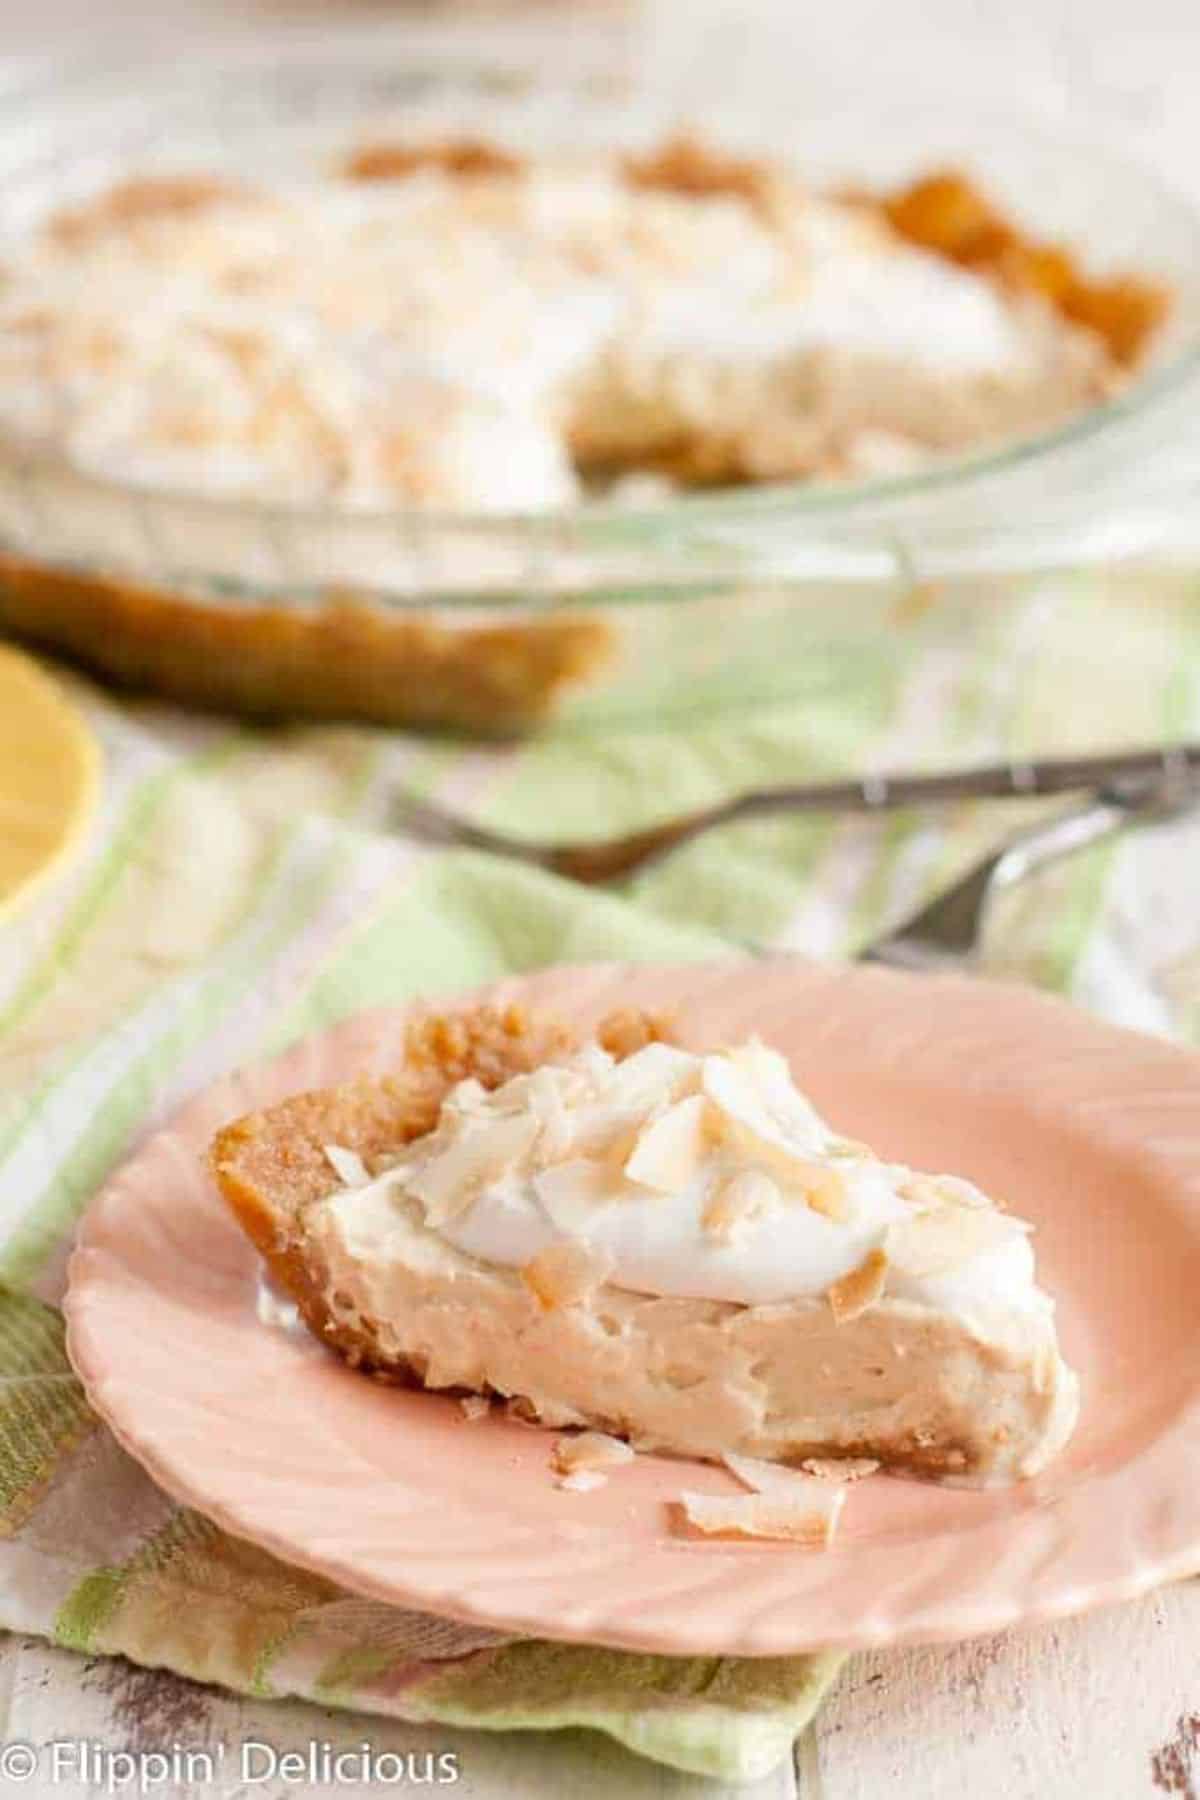 A piece of Gluten-Free Dairy Free Coconut Cream Pie on a pink plate.